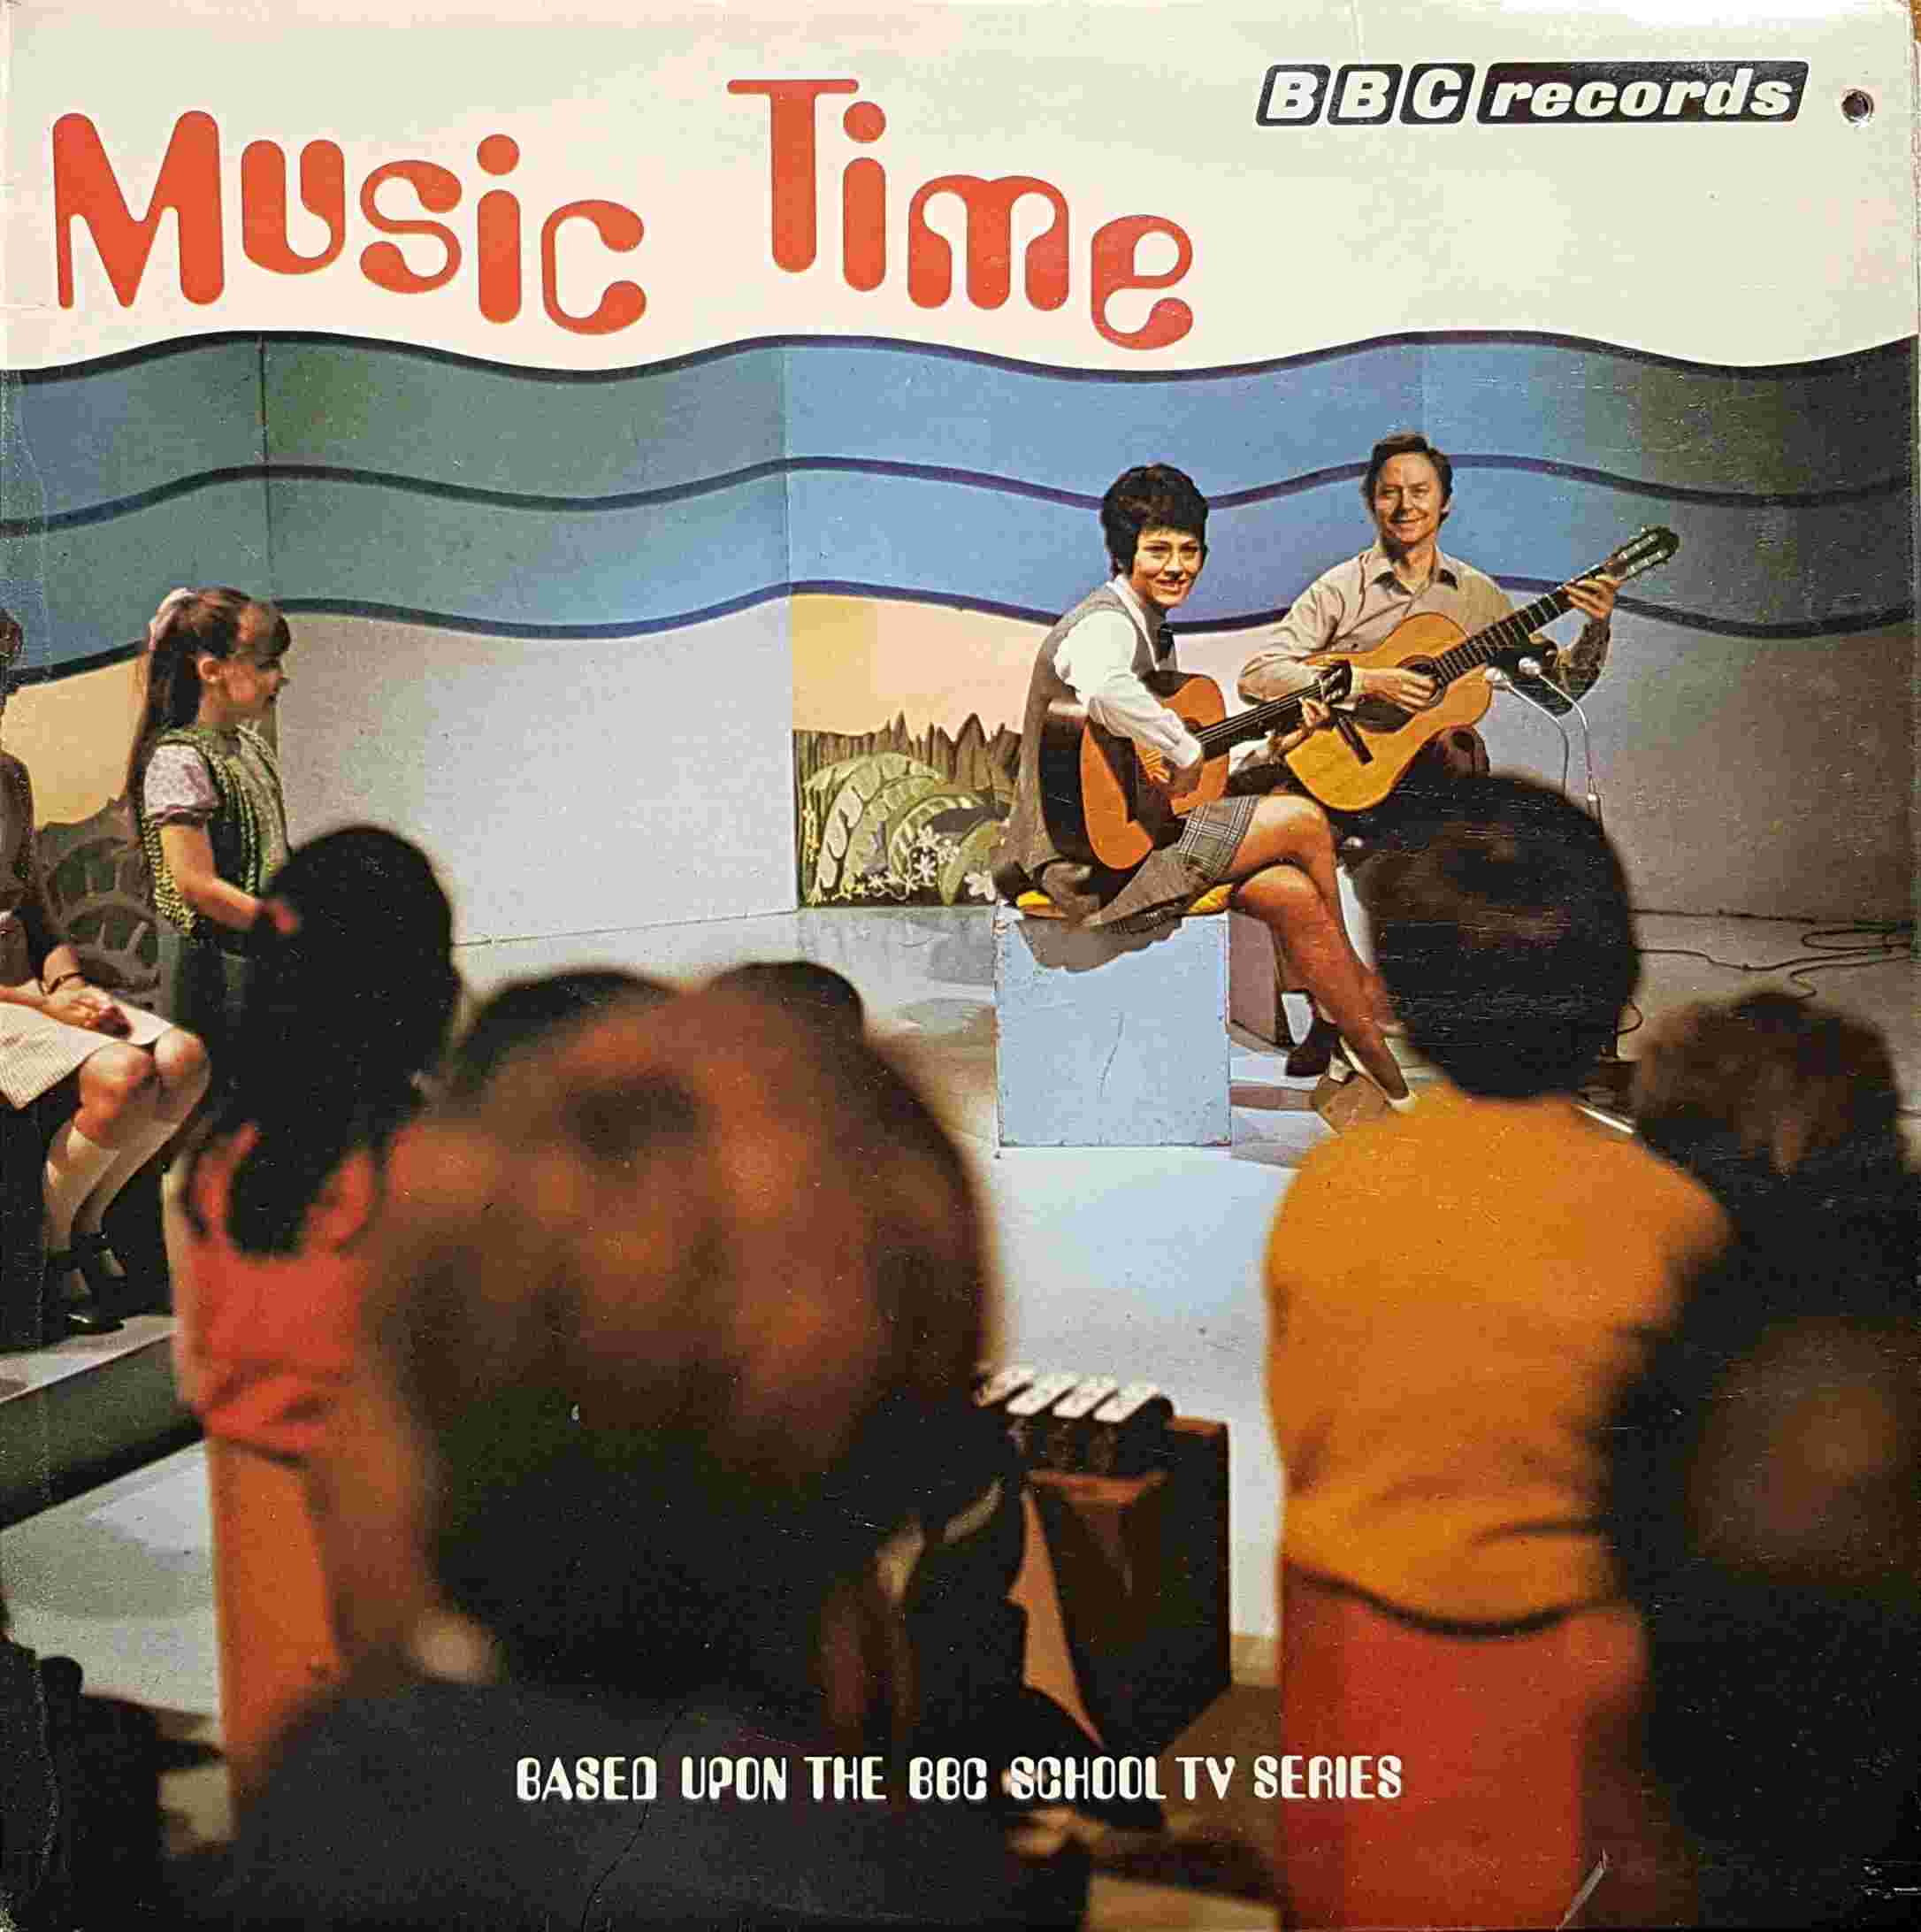 Picture of Music time by artist Mari Griffith / Ian Humphris from the BBC albums - Records and Tapes library